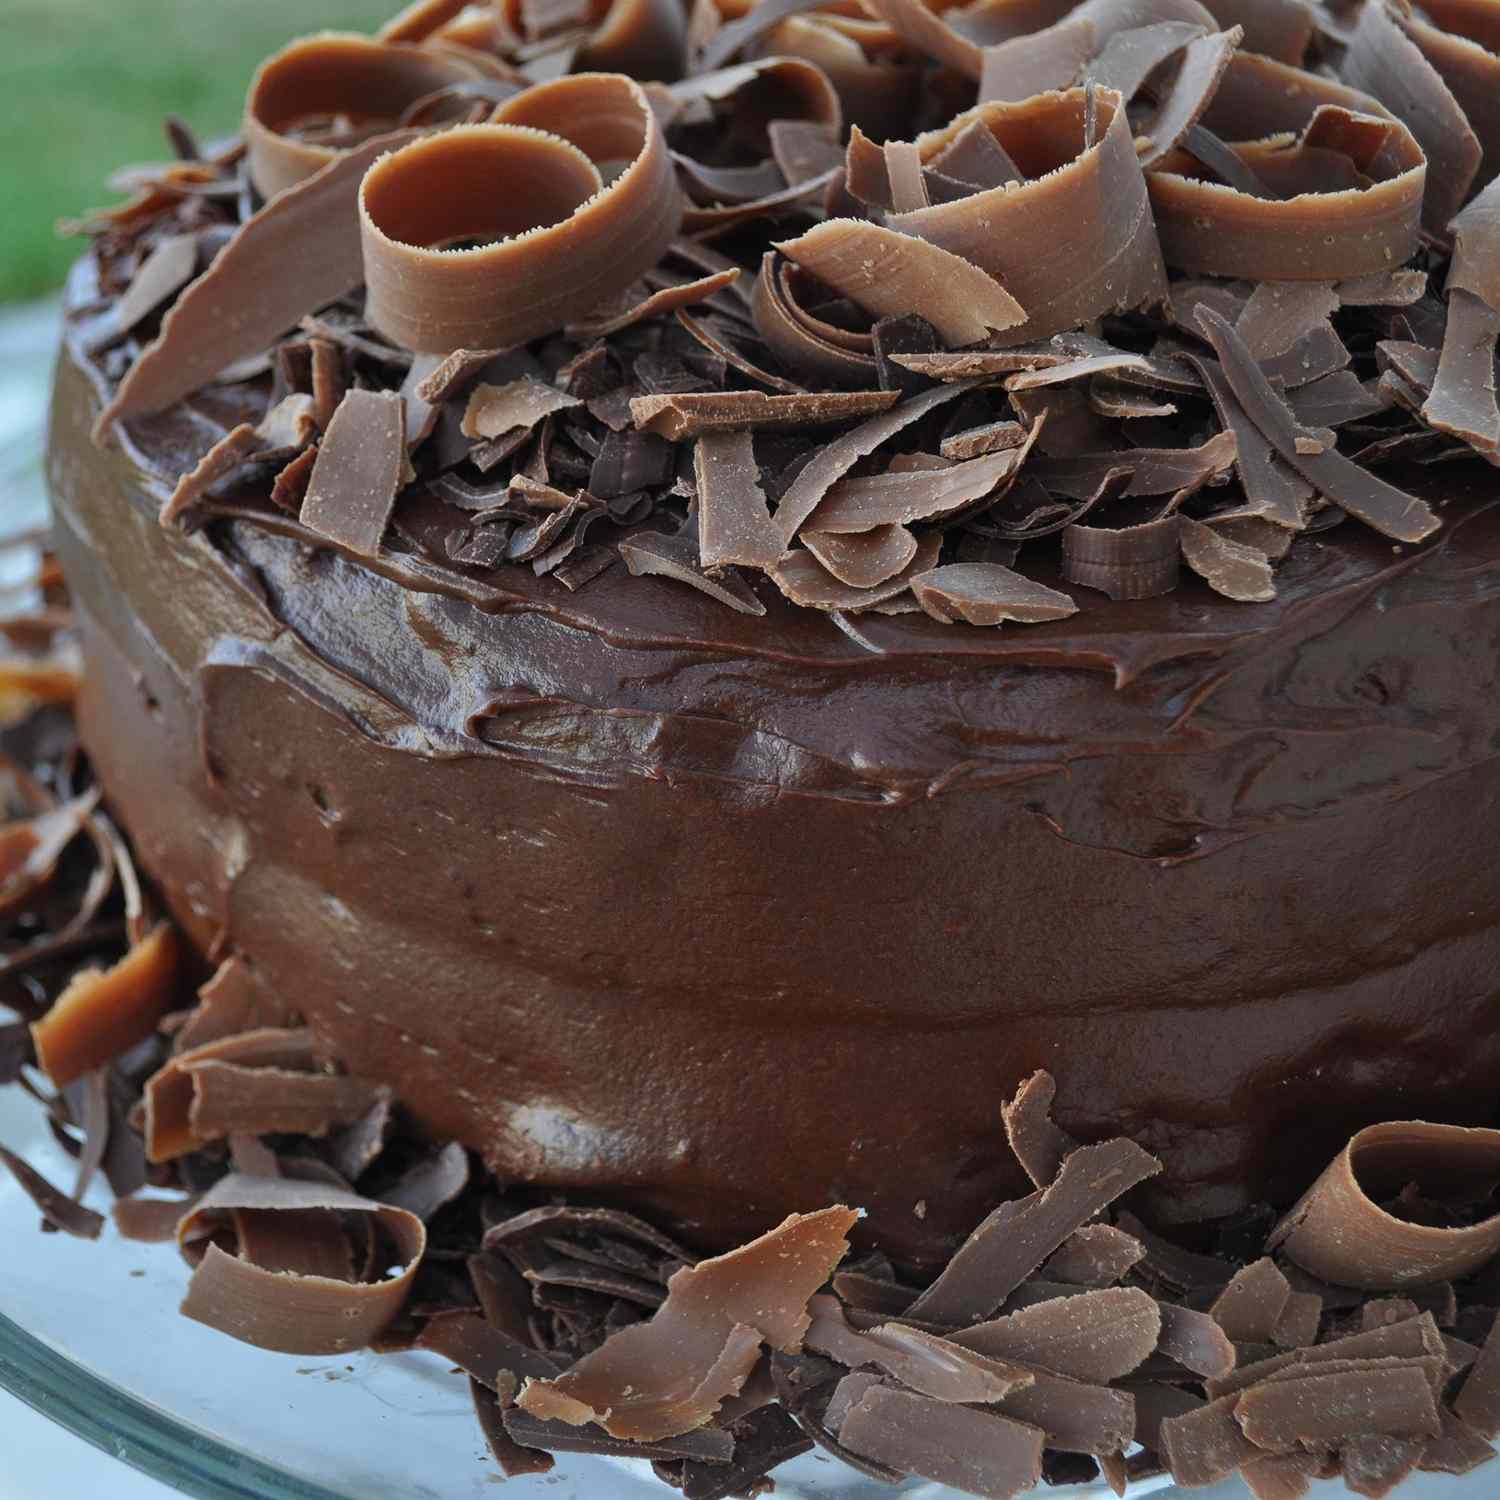 close up view of Hershey's Chocolate Cake garnished with chocolate